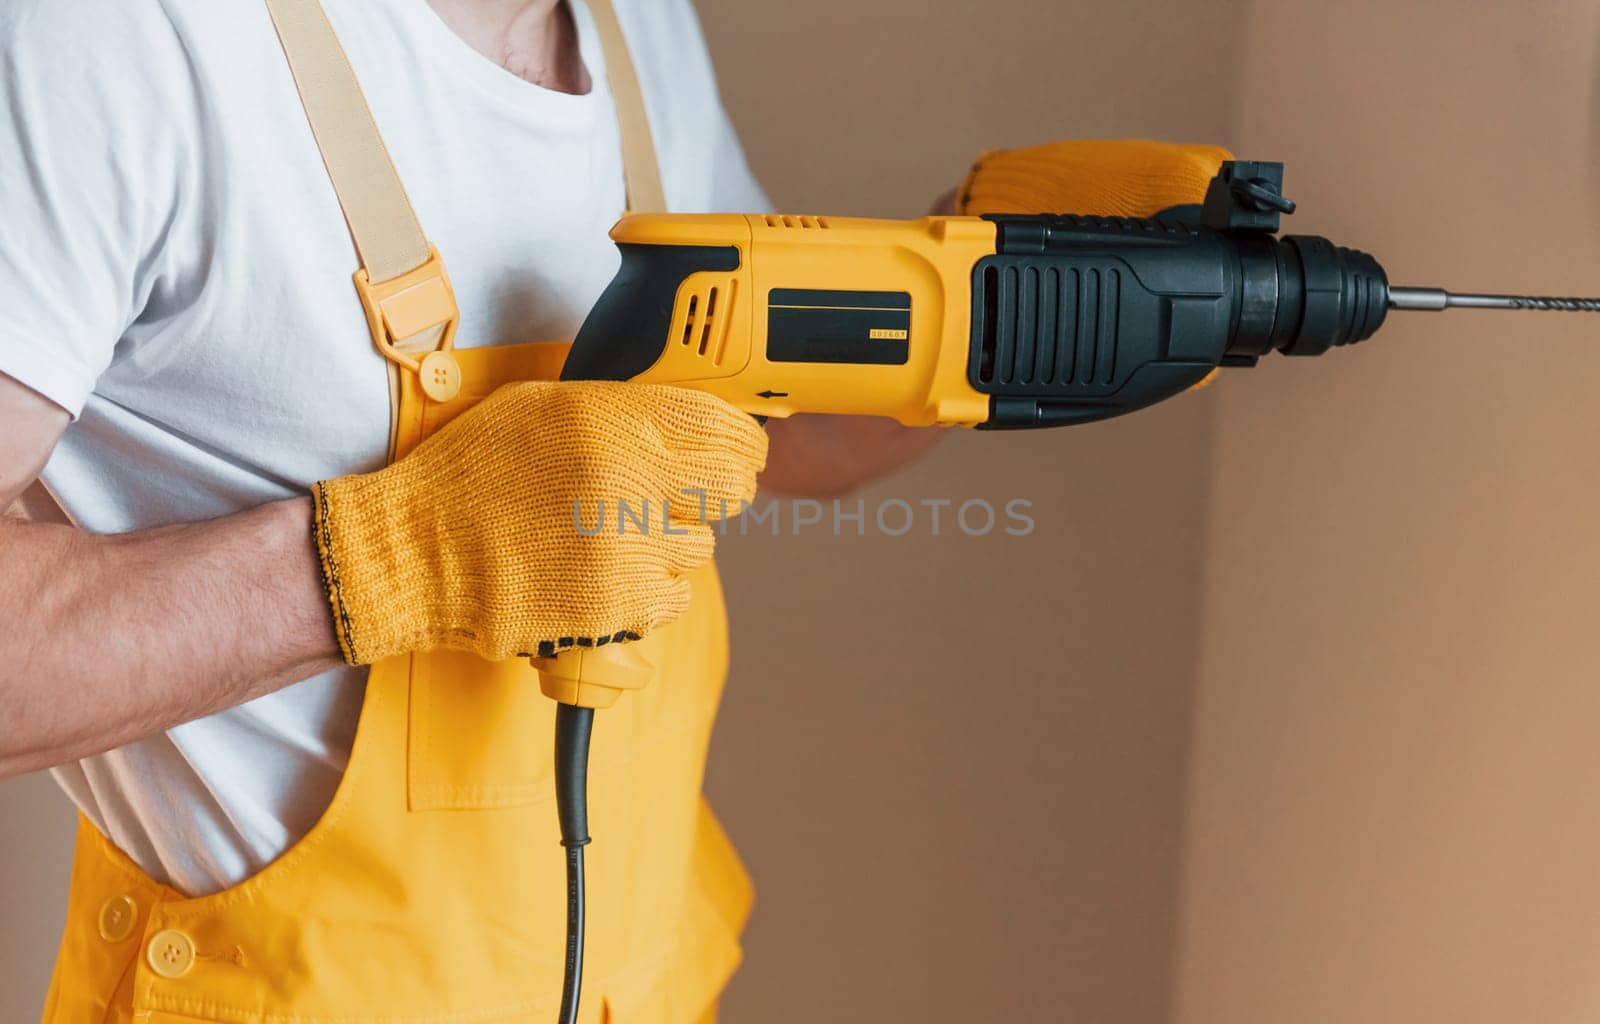 Handyman in yellow uniform works indoors by using hammer drill. House renovation conception by Standret